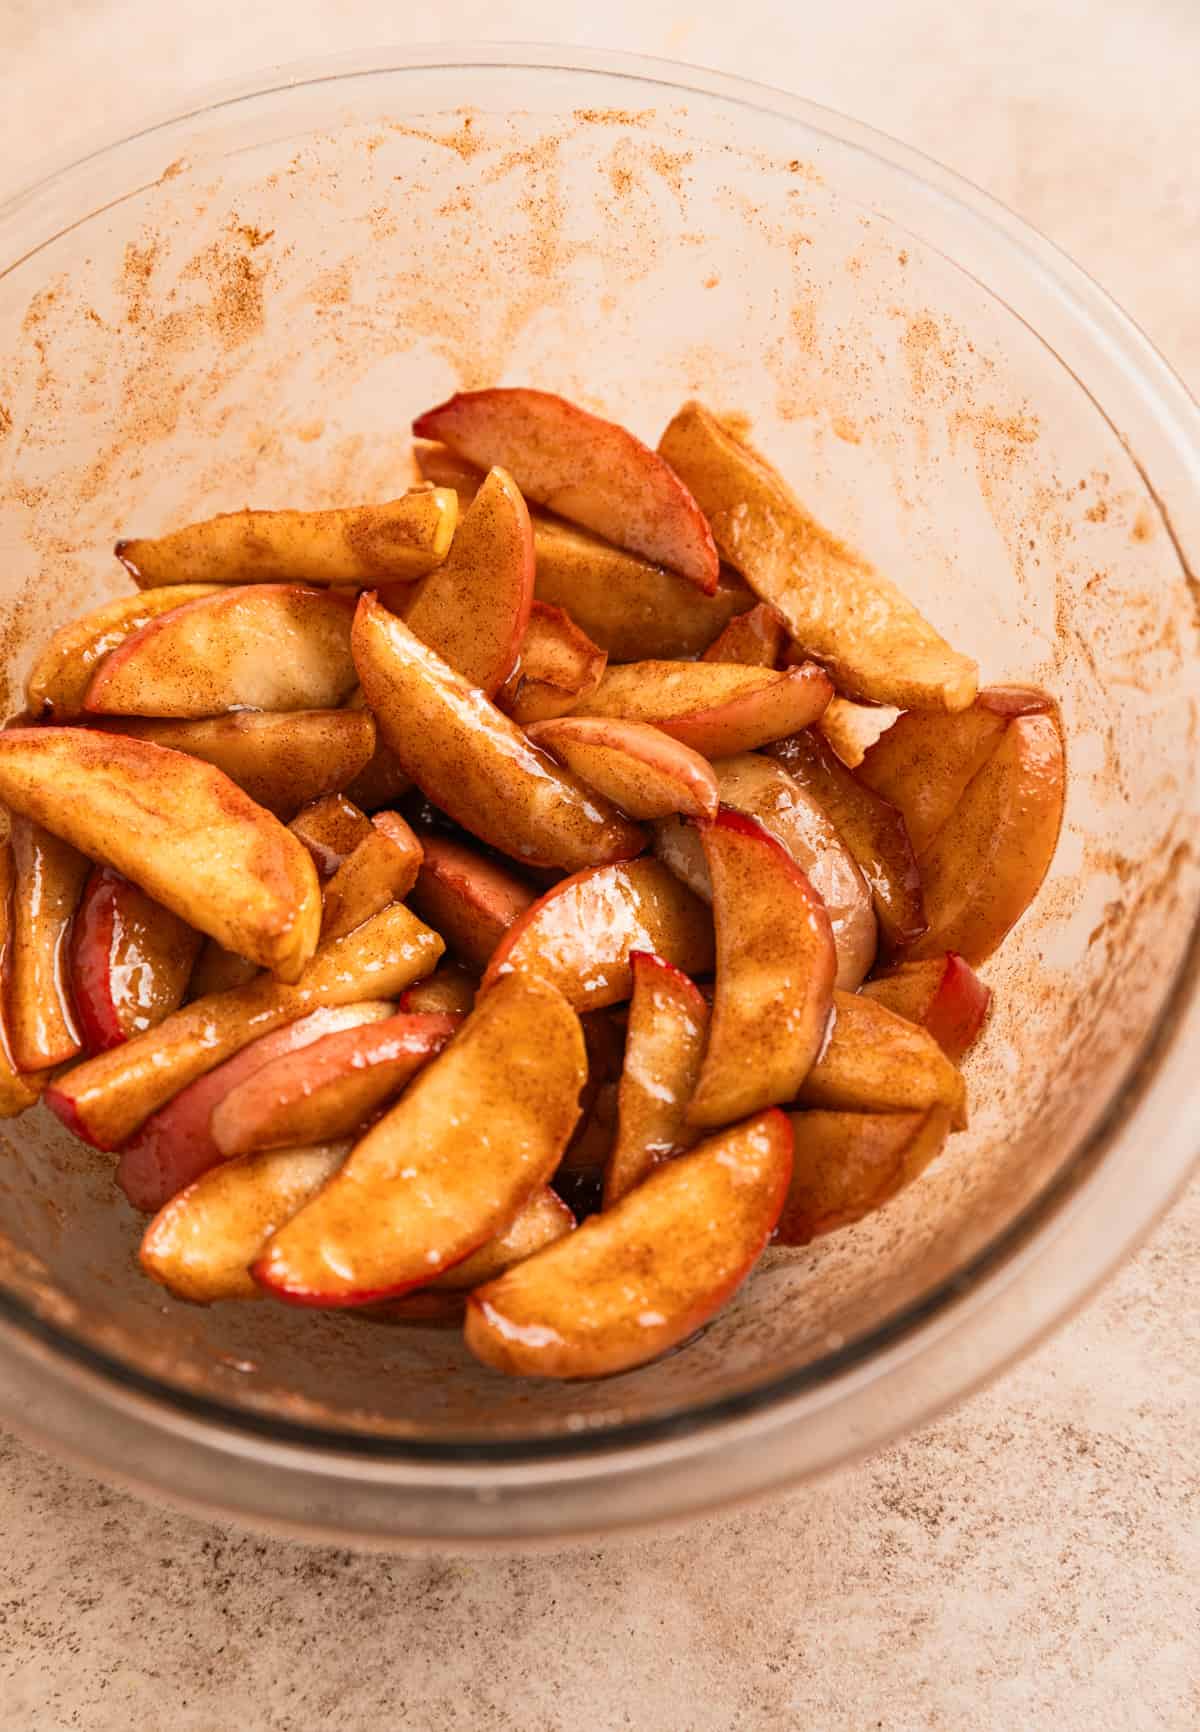 Sliced apples tossed in butter, cinnamon and sugar.